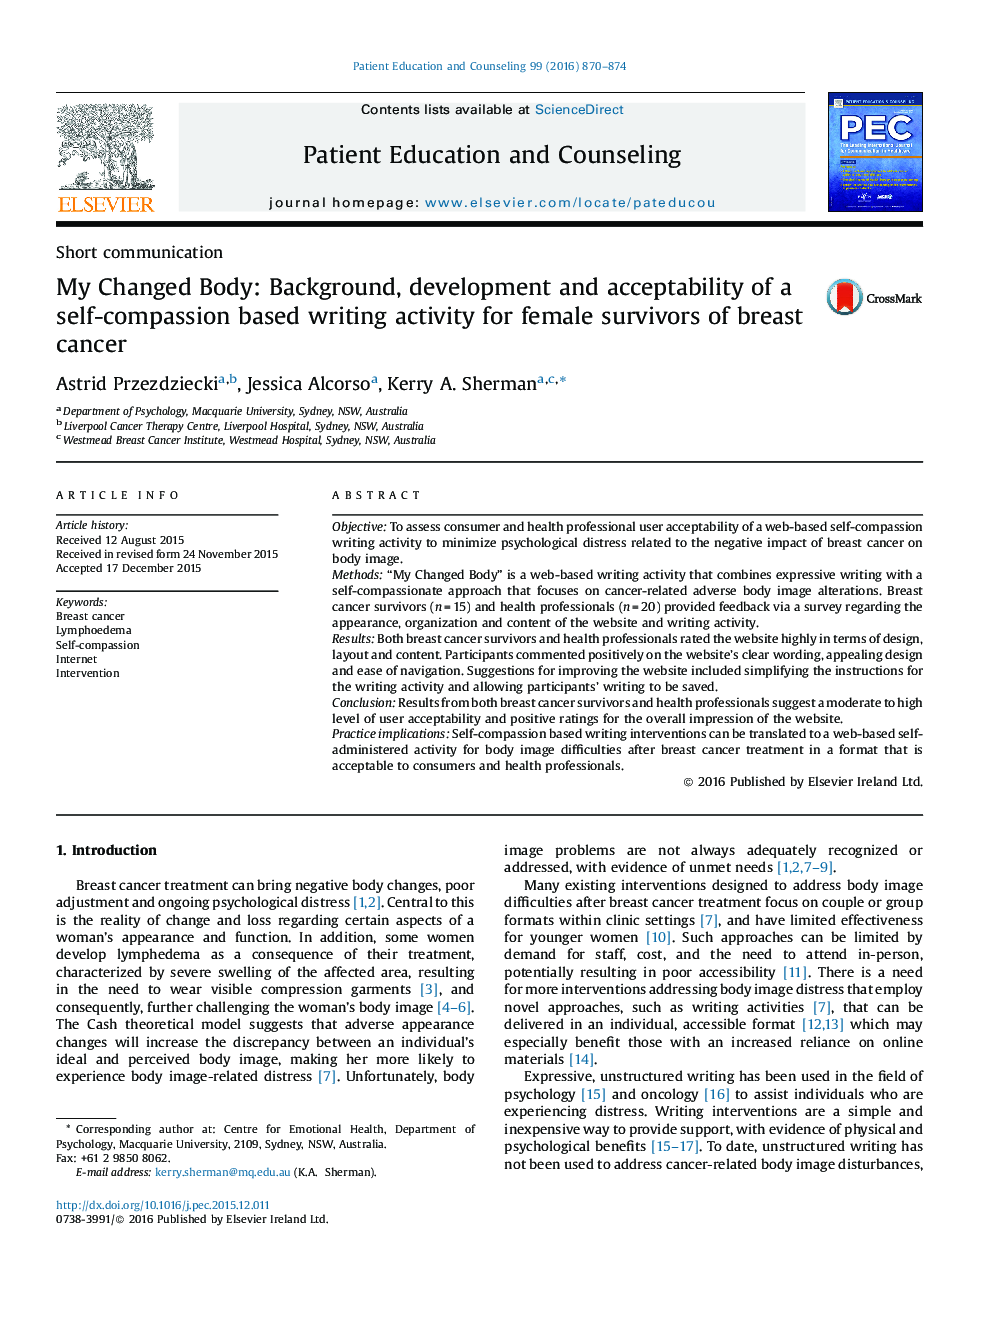 My Changed Body: Background, development and acceptability of a self-compassion based writing activity for female survivors of breast cancer